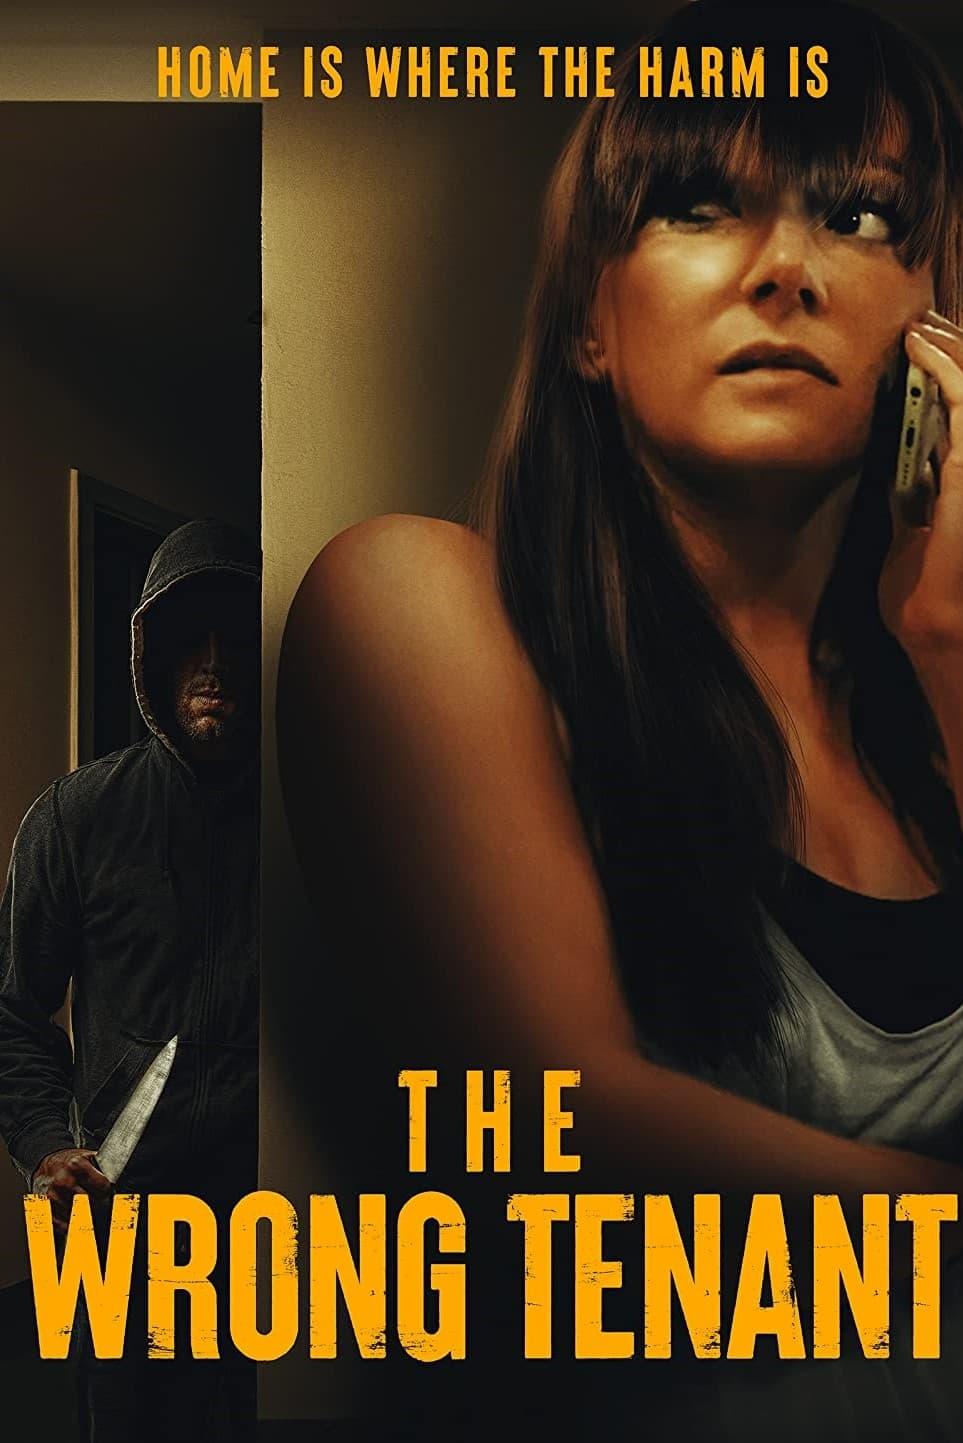 The Wrong Tenant poster